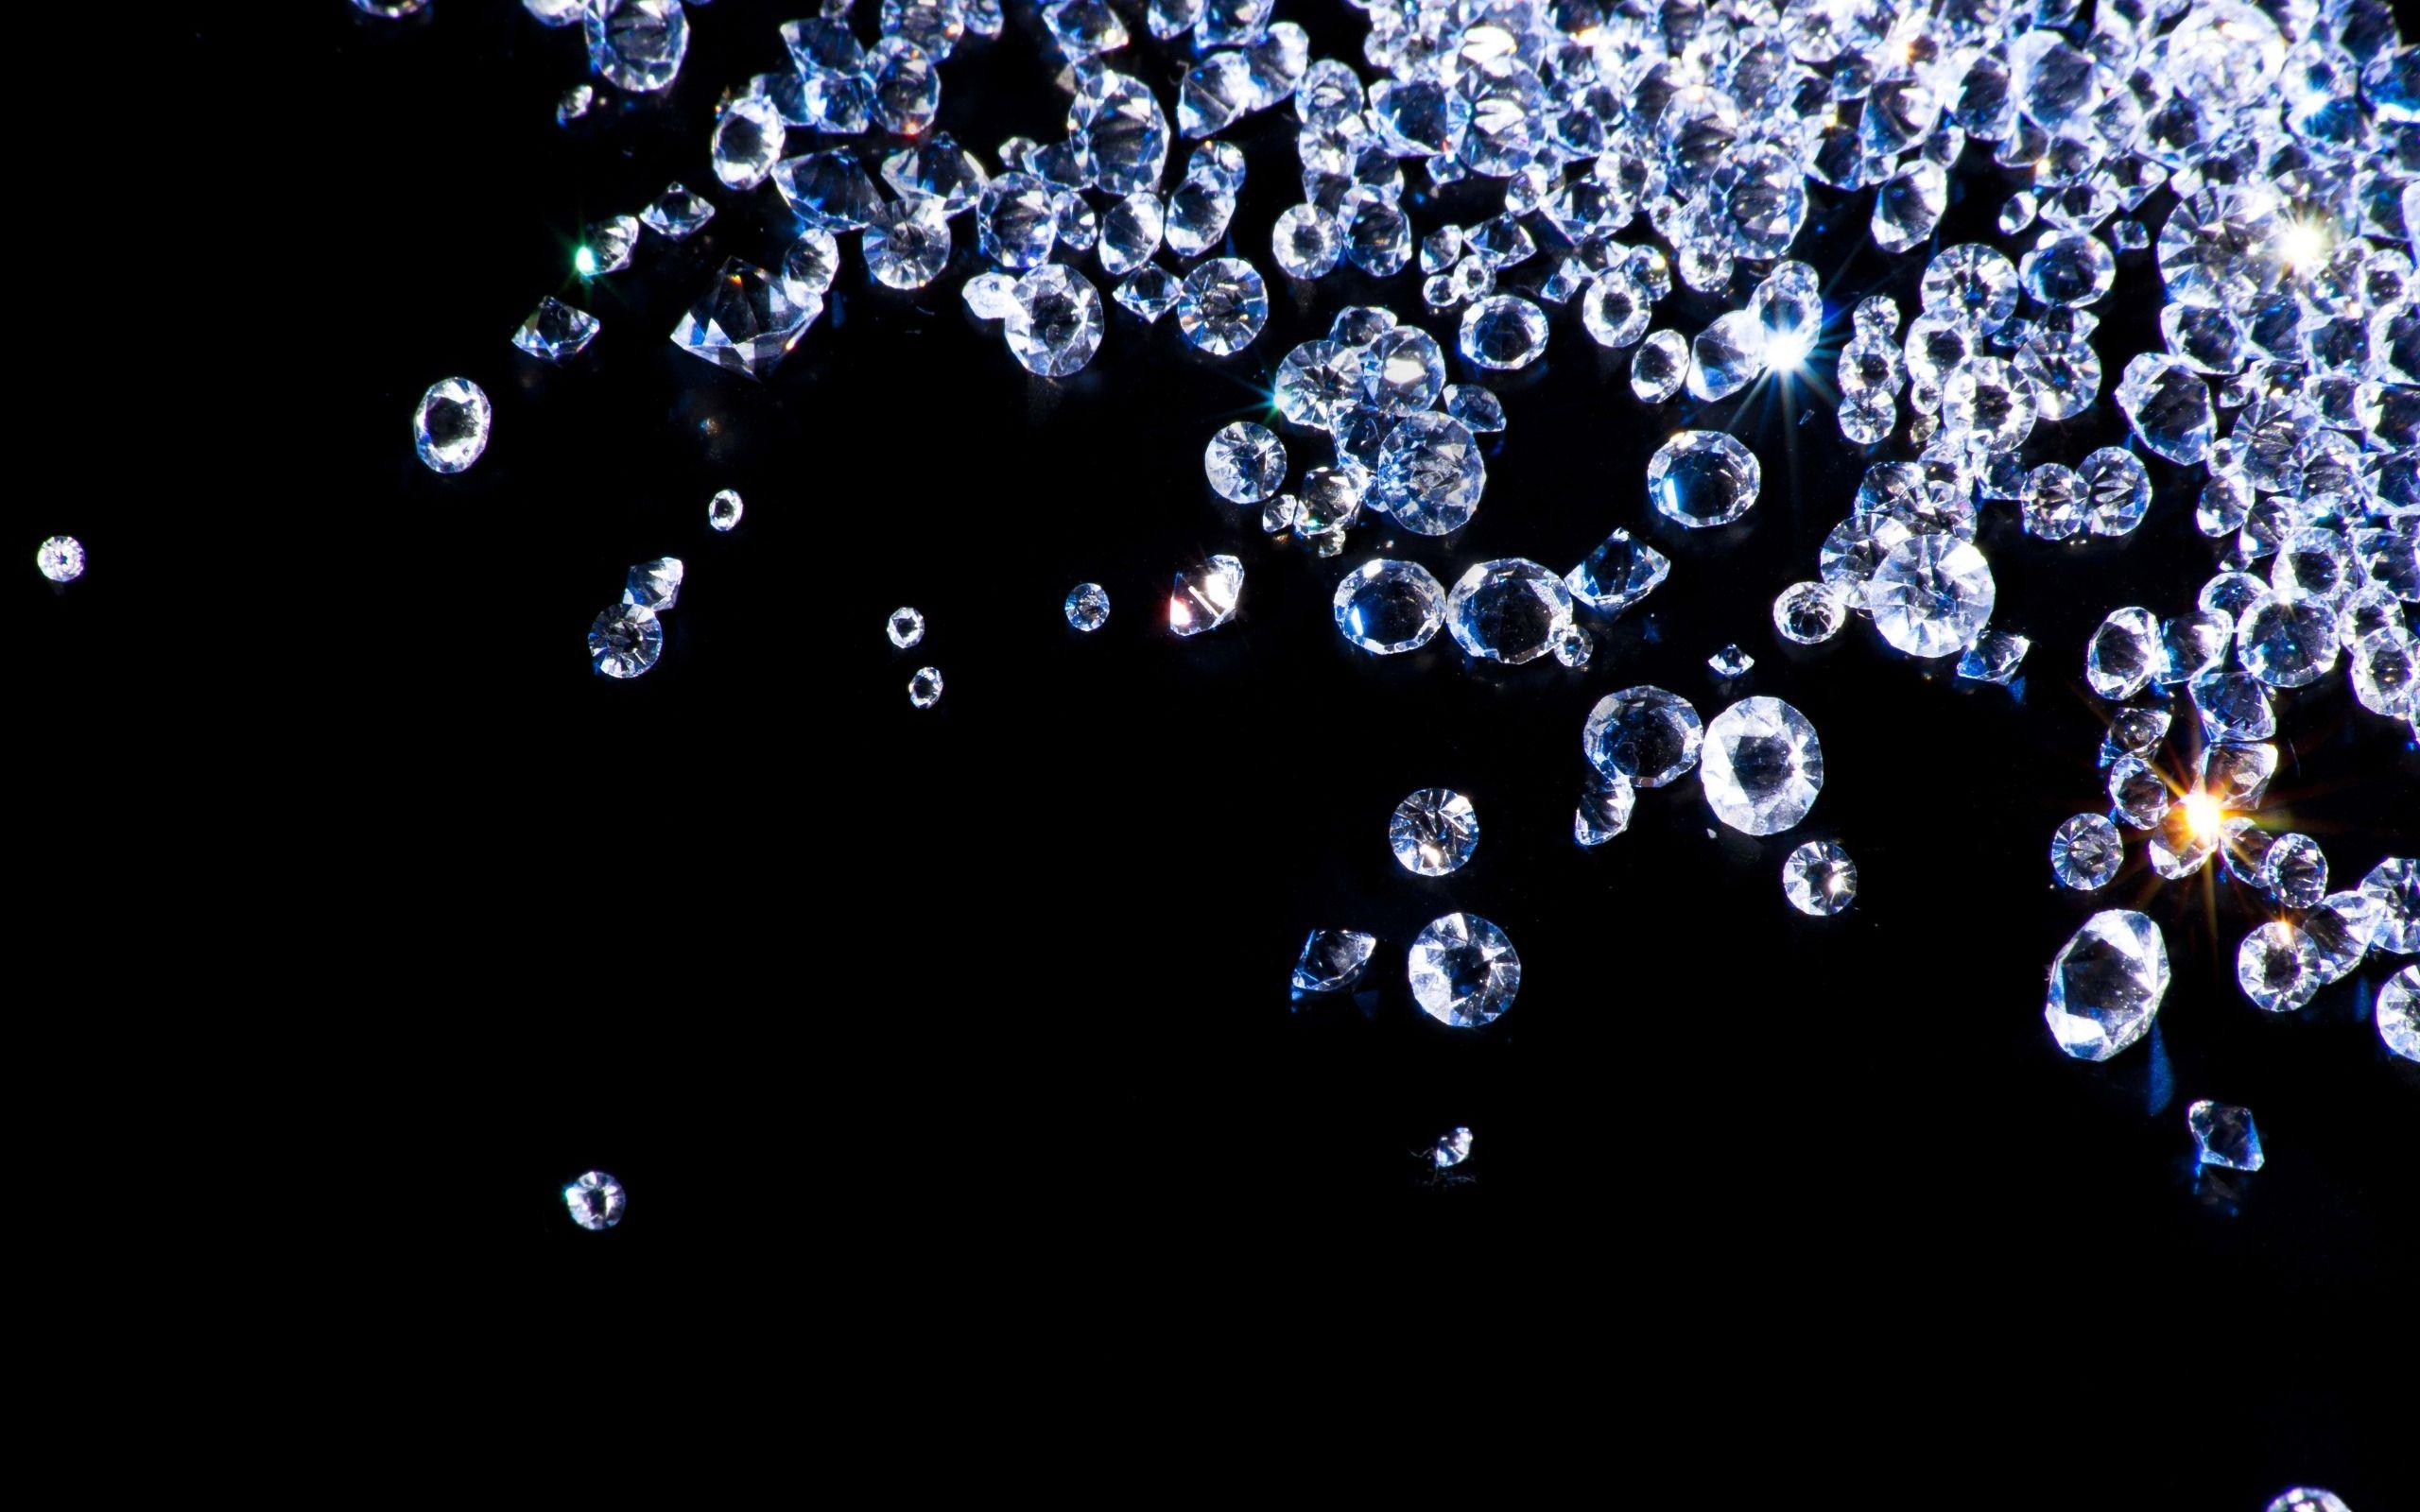 Sprinkle of diamonds wallpaper and image, picture